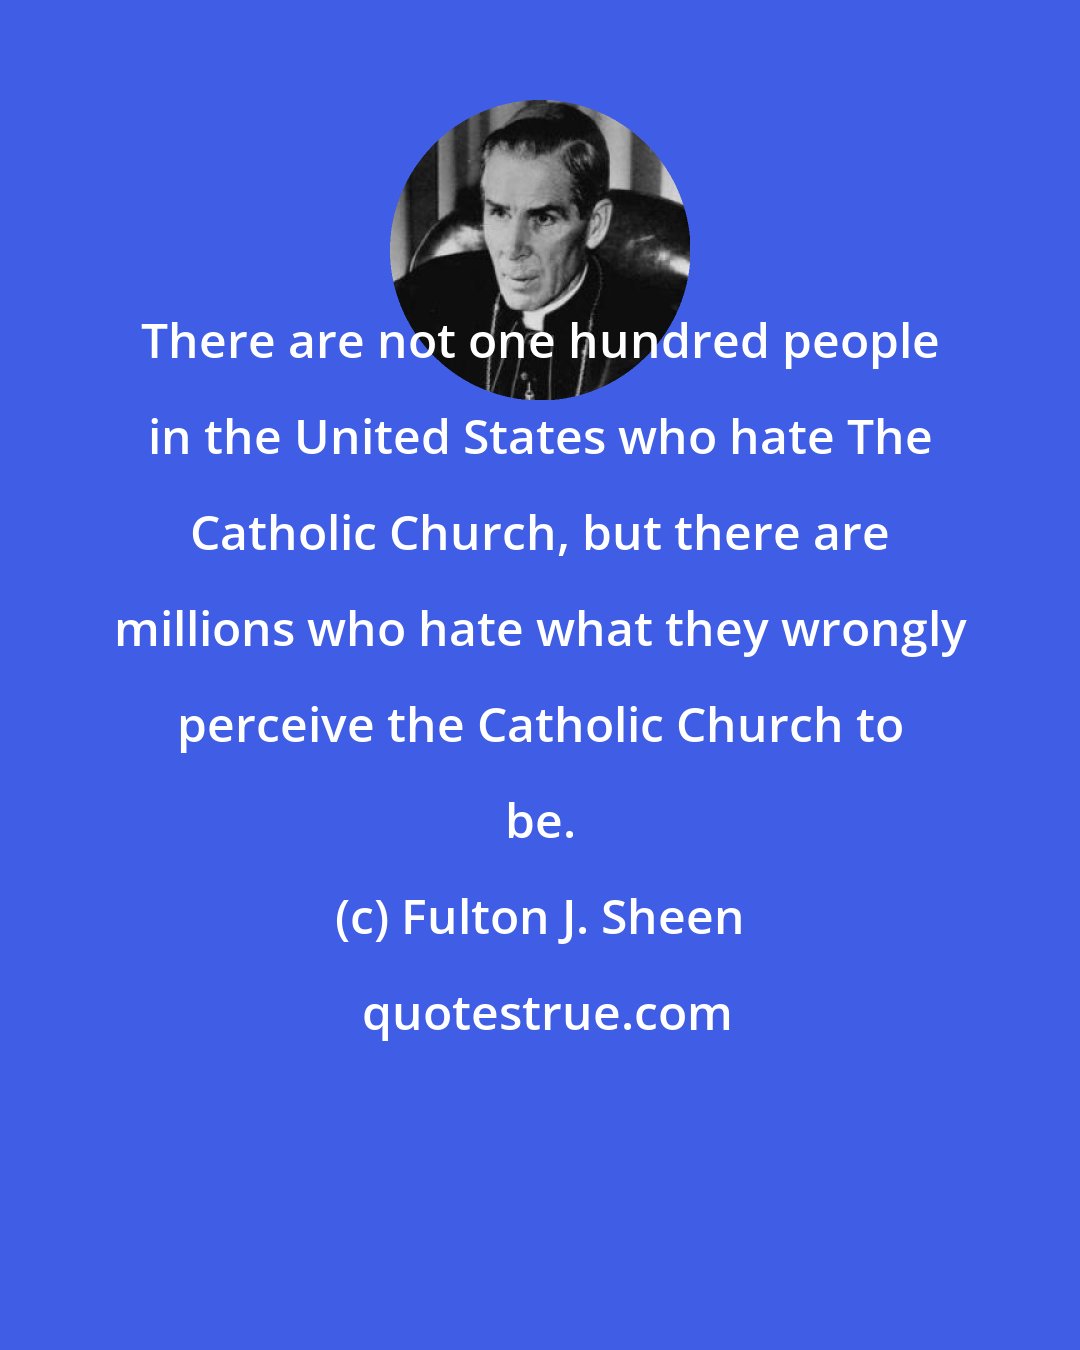 Fulton J. Sheen: There are not one hundred people in the United States who hate The Catholic Church, but there are millions who hate what they wrongly perceive the Catholic Church to be.